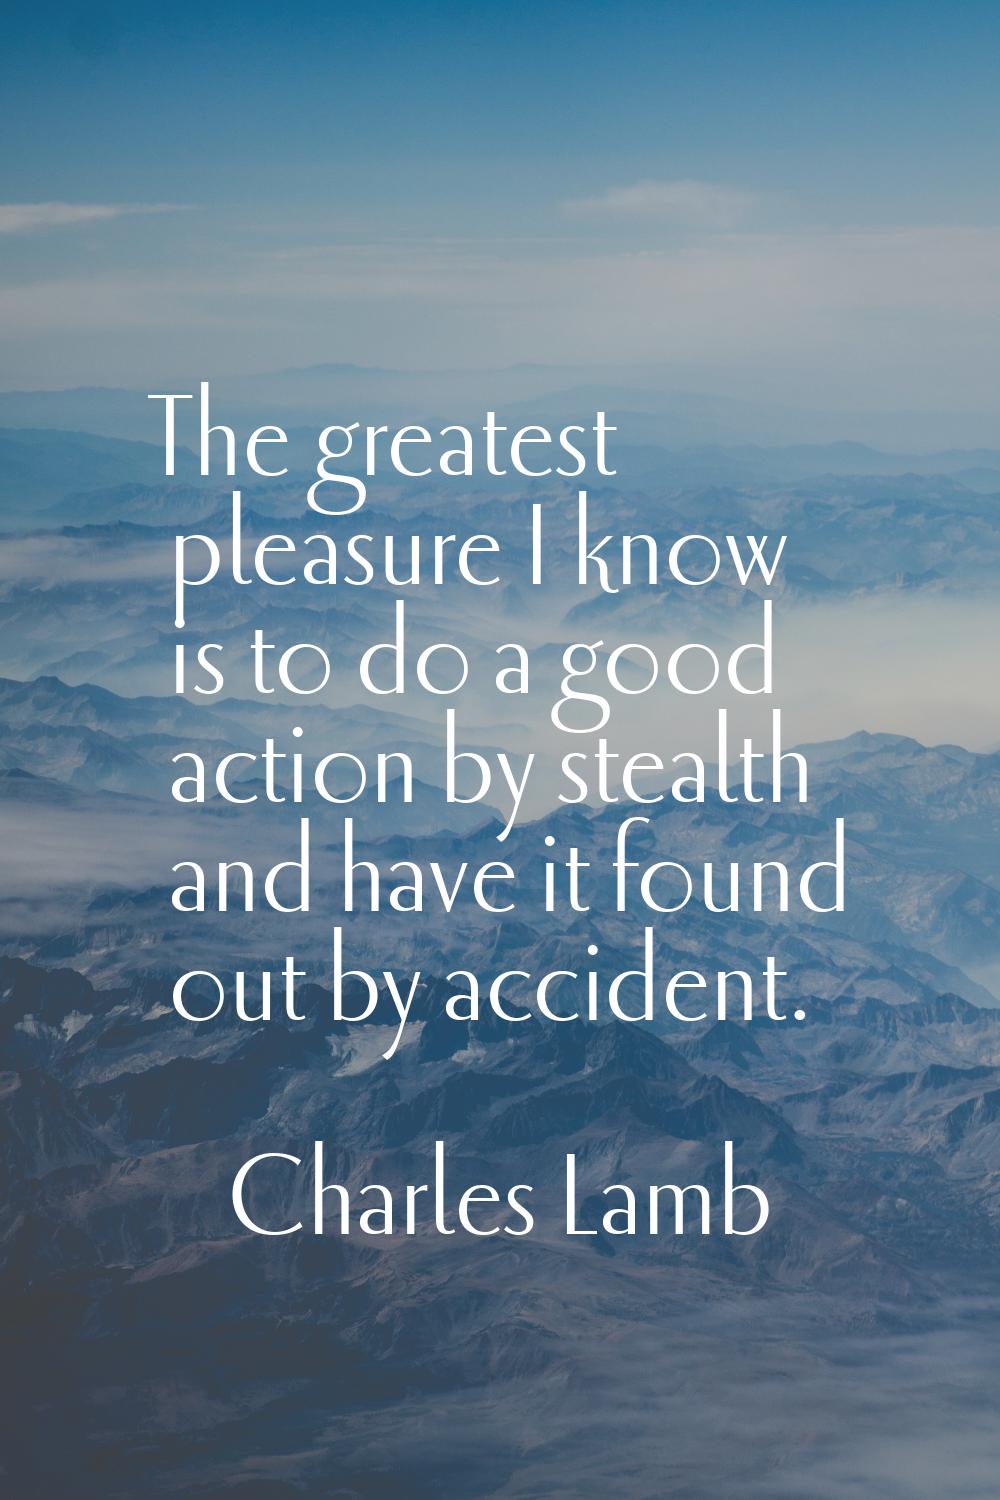 The greatest pleasure I know is to do a good action by stealth and have it found out by accident.